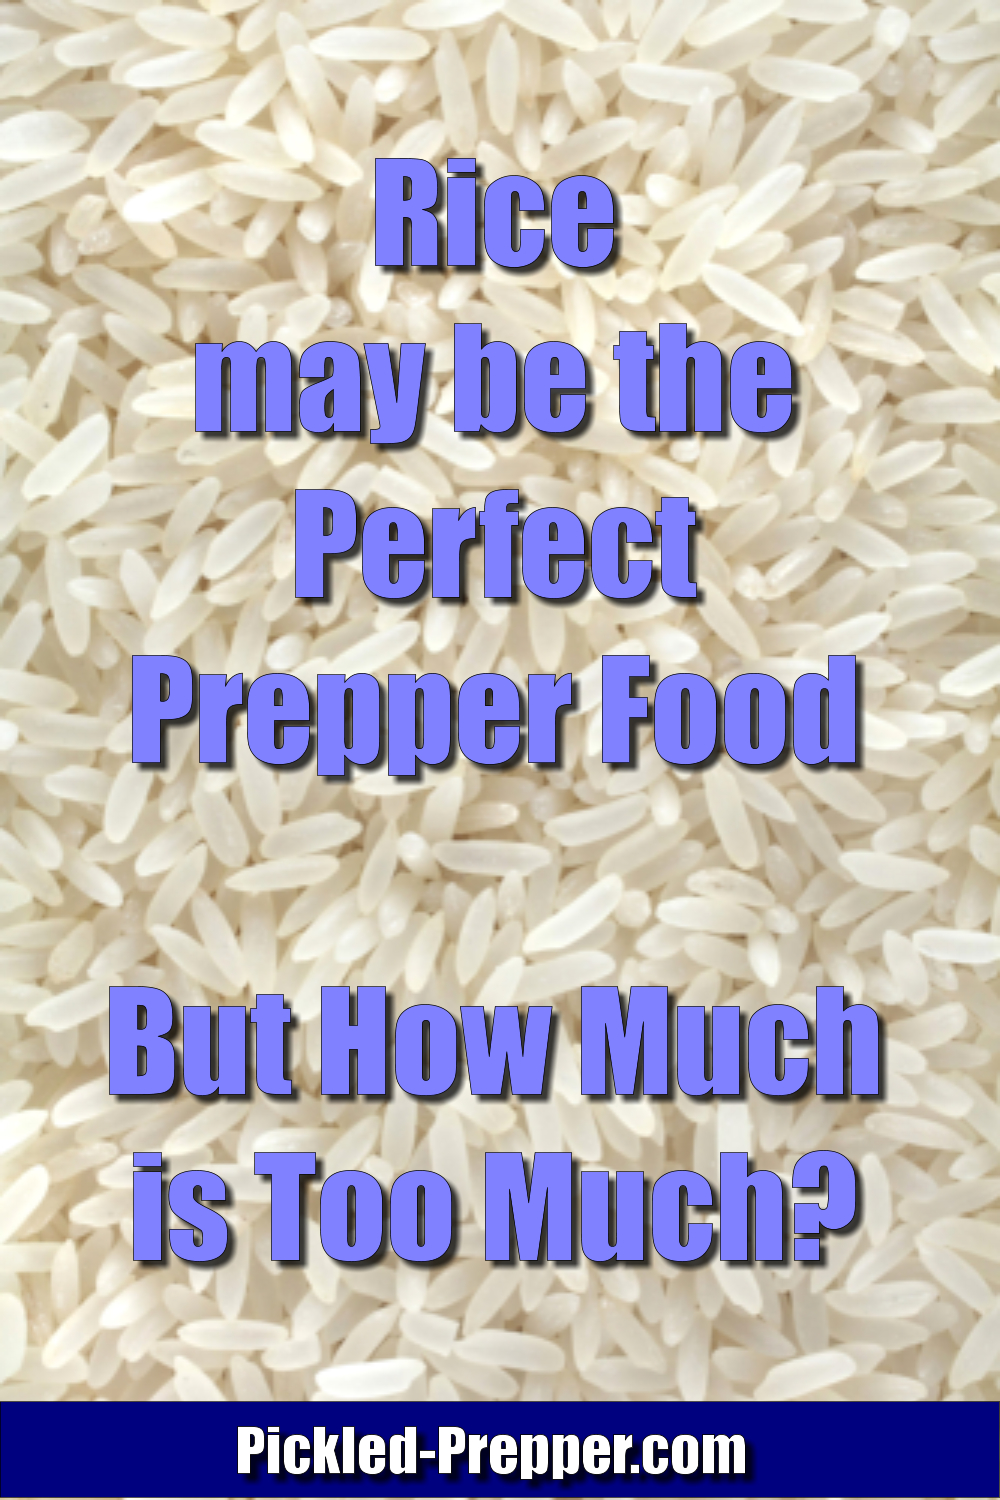 Can a Prepper Have Too Much Rice?